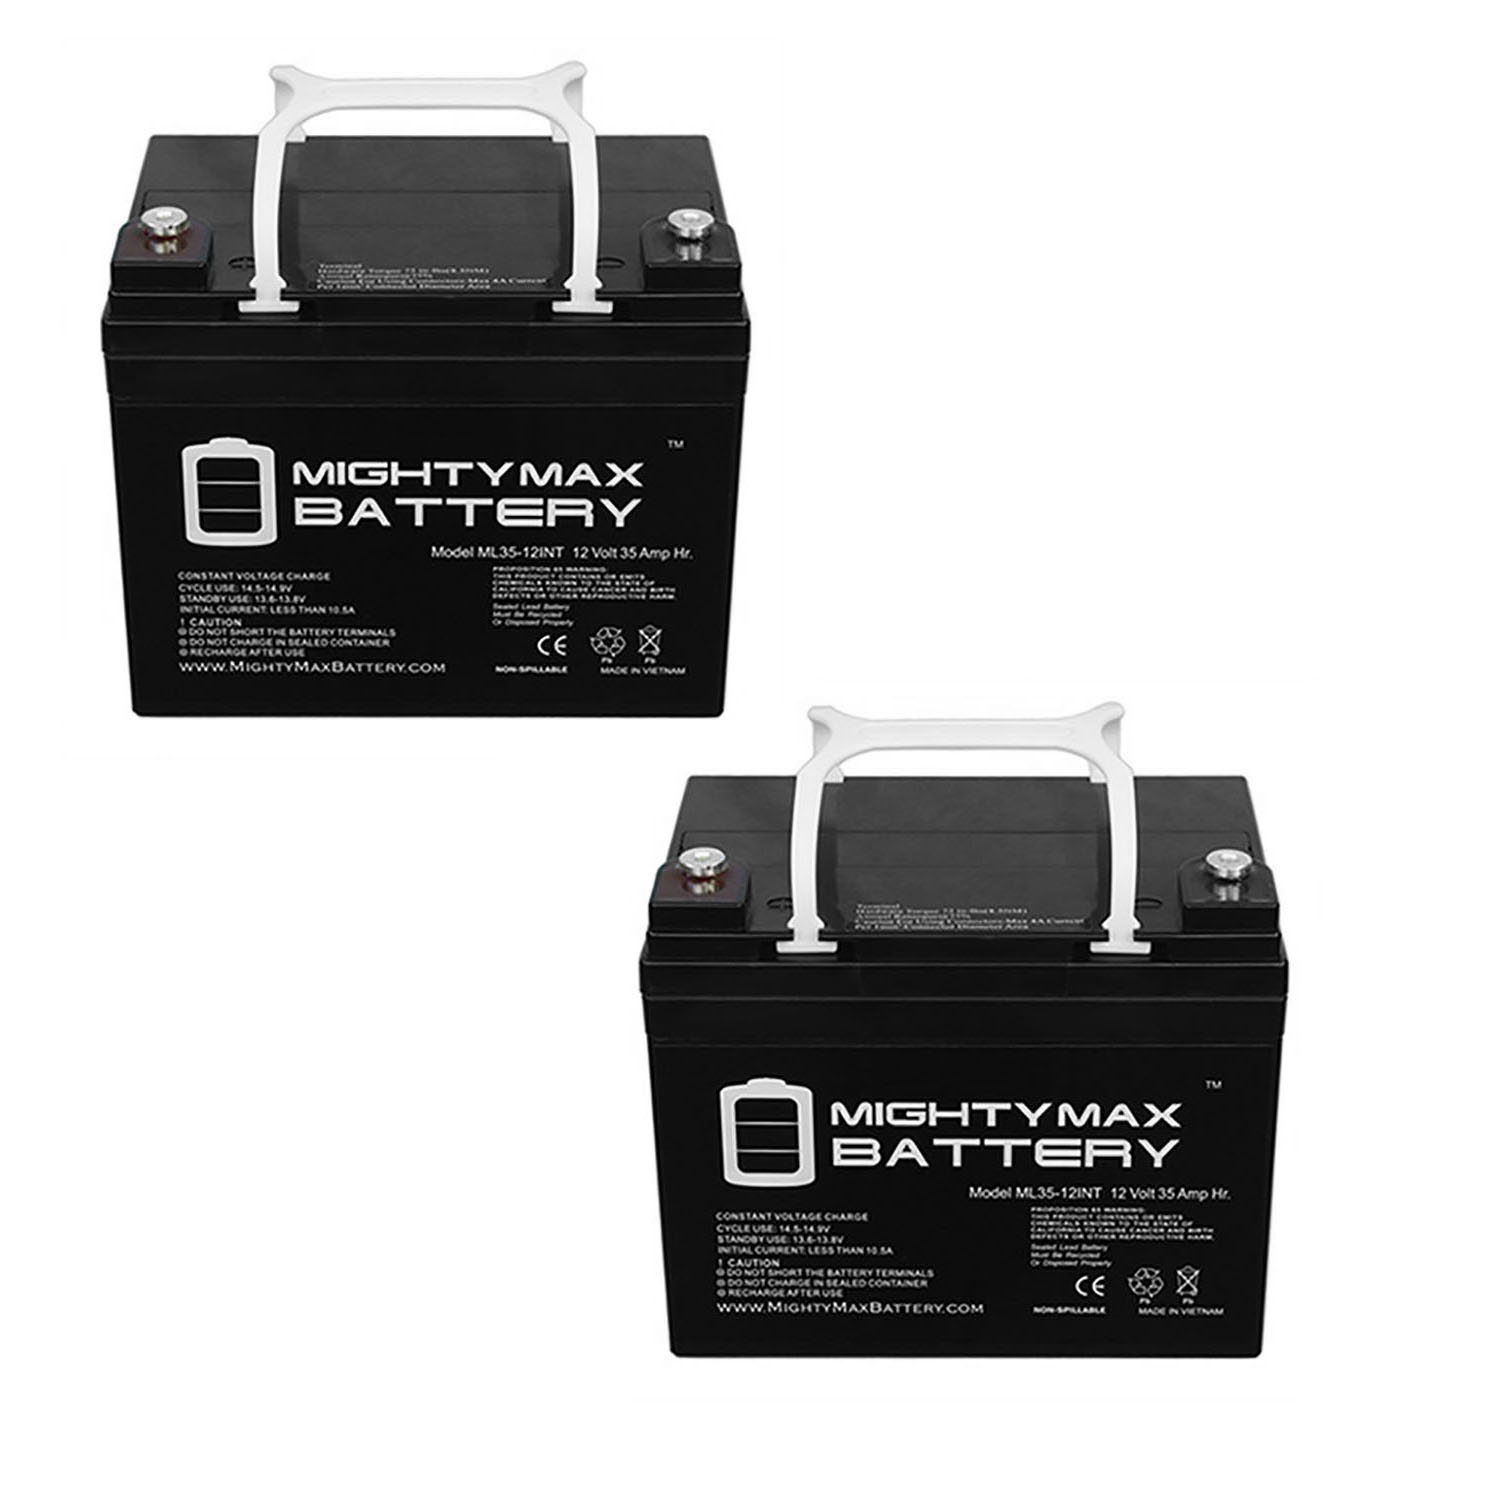 12V 35AH INT Replacement Battery for Cub Cadet 1772 - 2 Pack